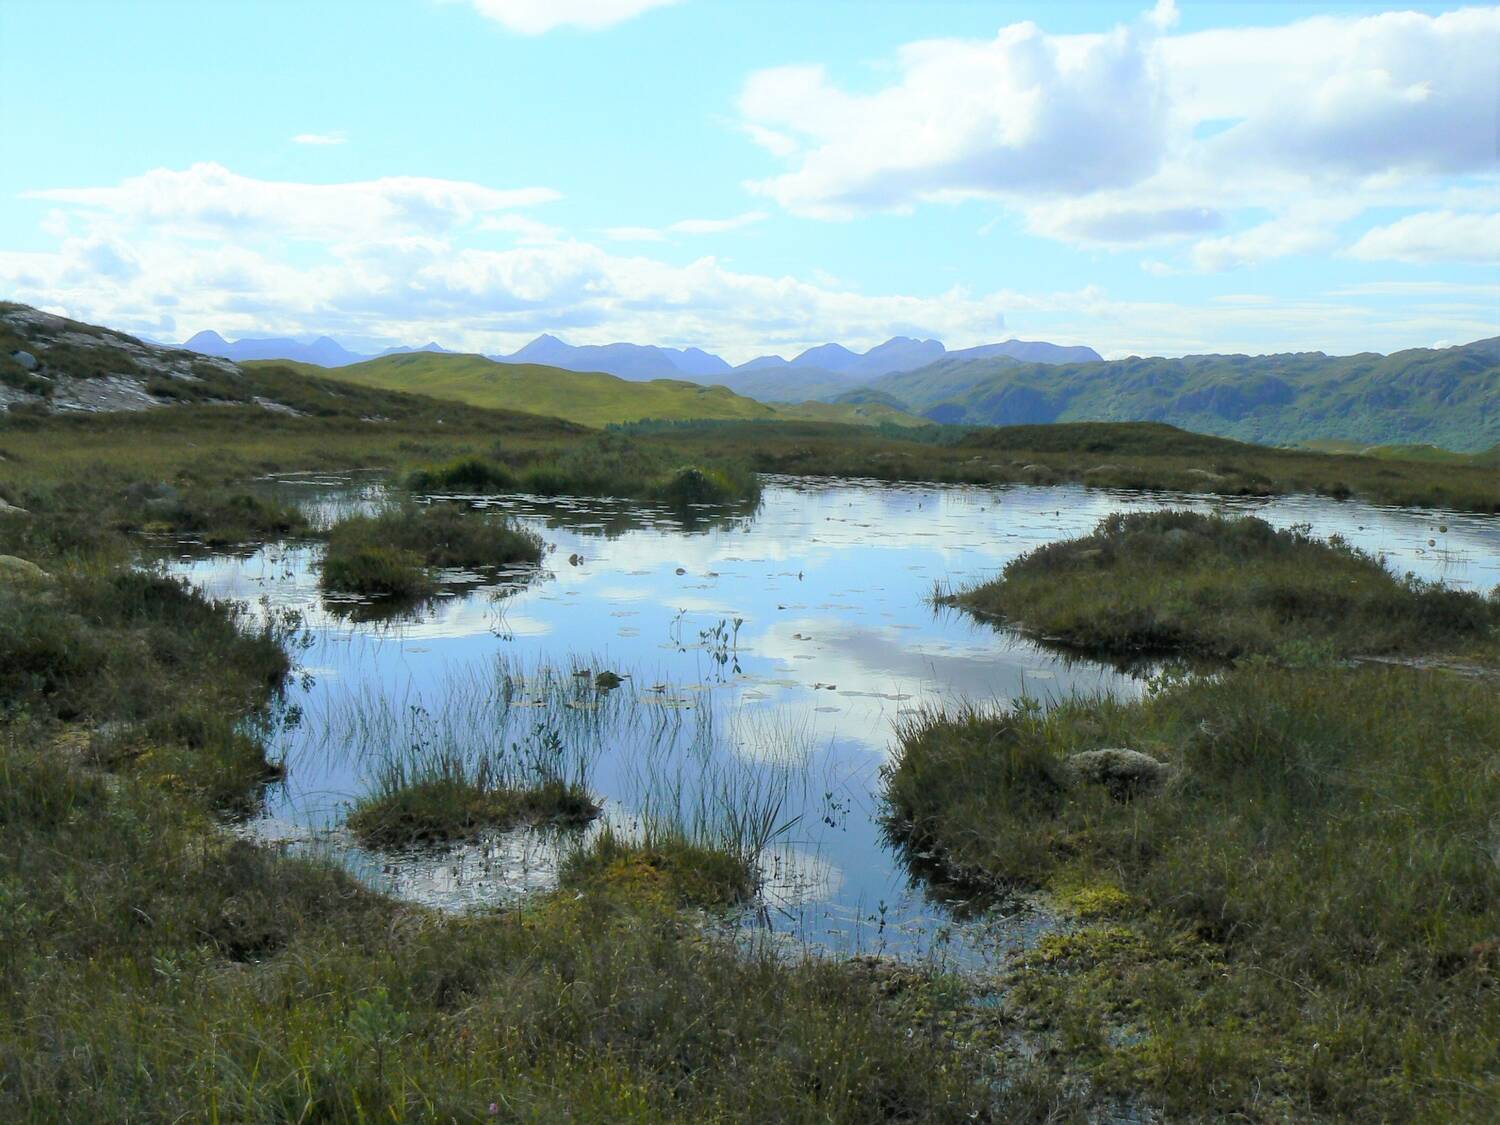 A peat bog landscape, with a large pool of water and mossy hummocks and reeds sticking out. Mountains can be seen in the distance.